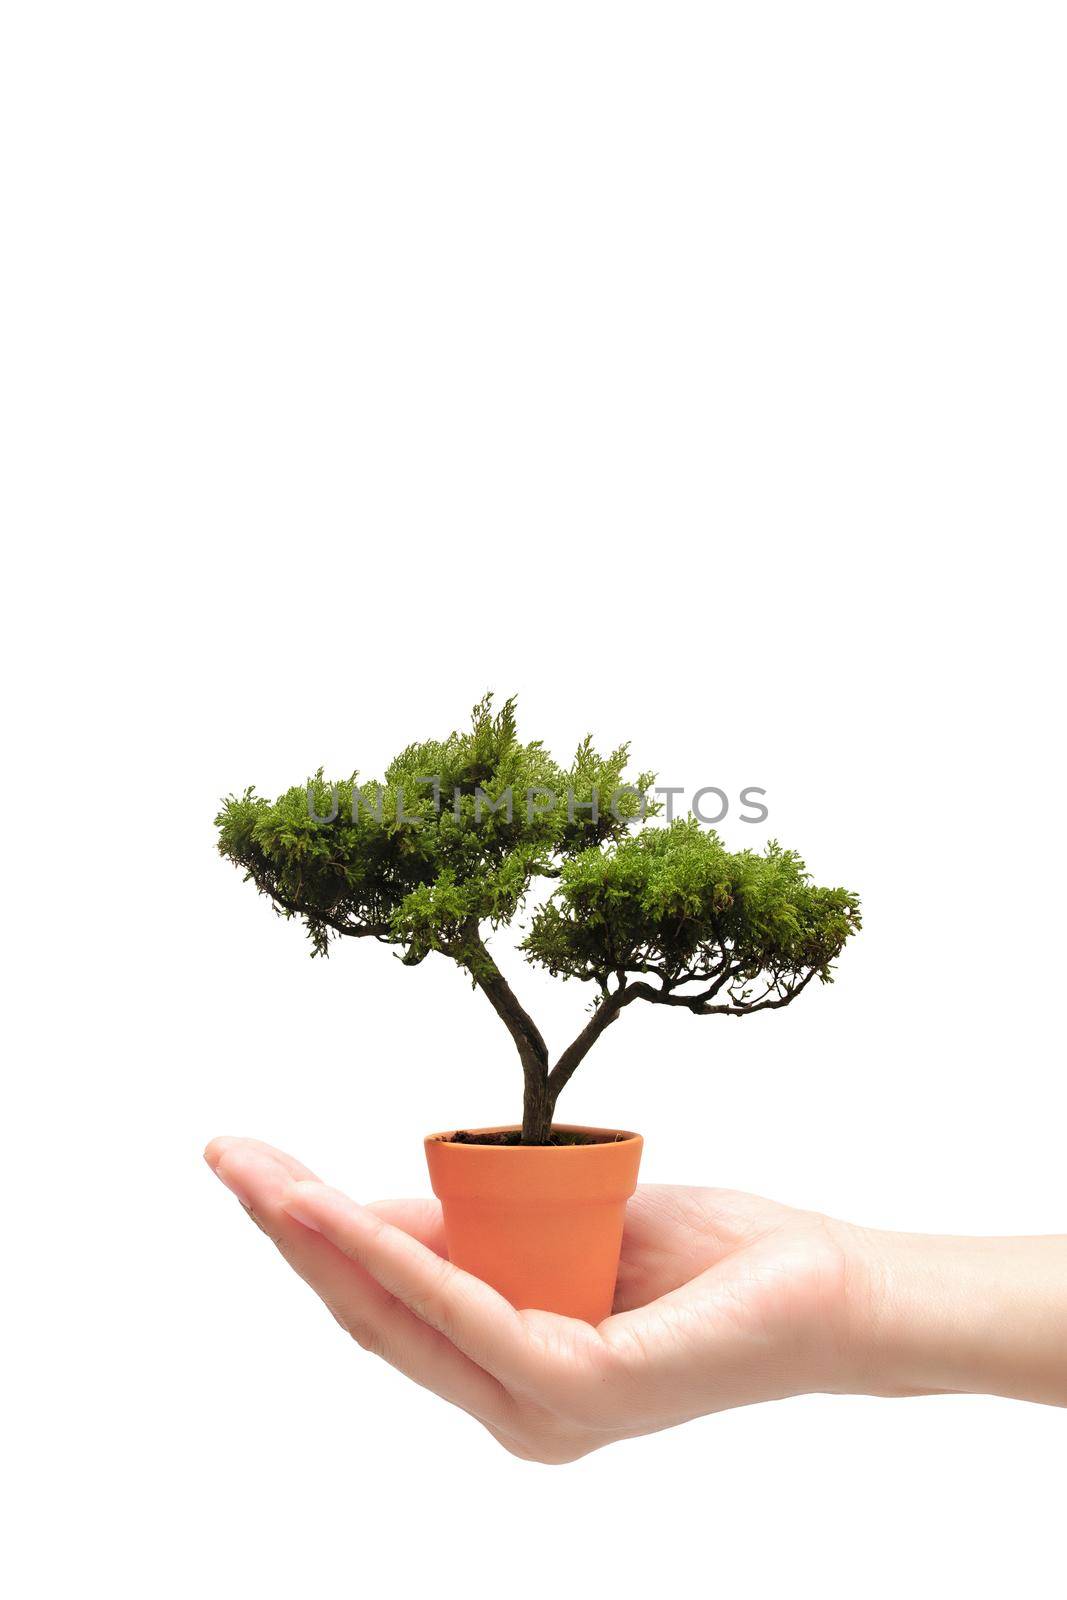 Hand holding bonsai tree in small pot on white background. Eco friendly world environment and growth concept by Nuamfolio